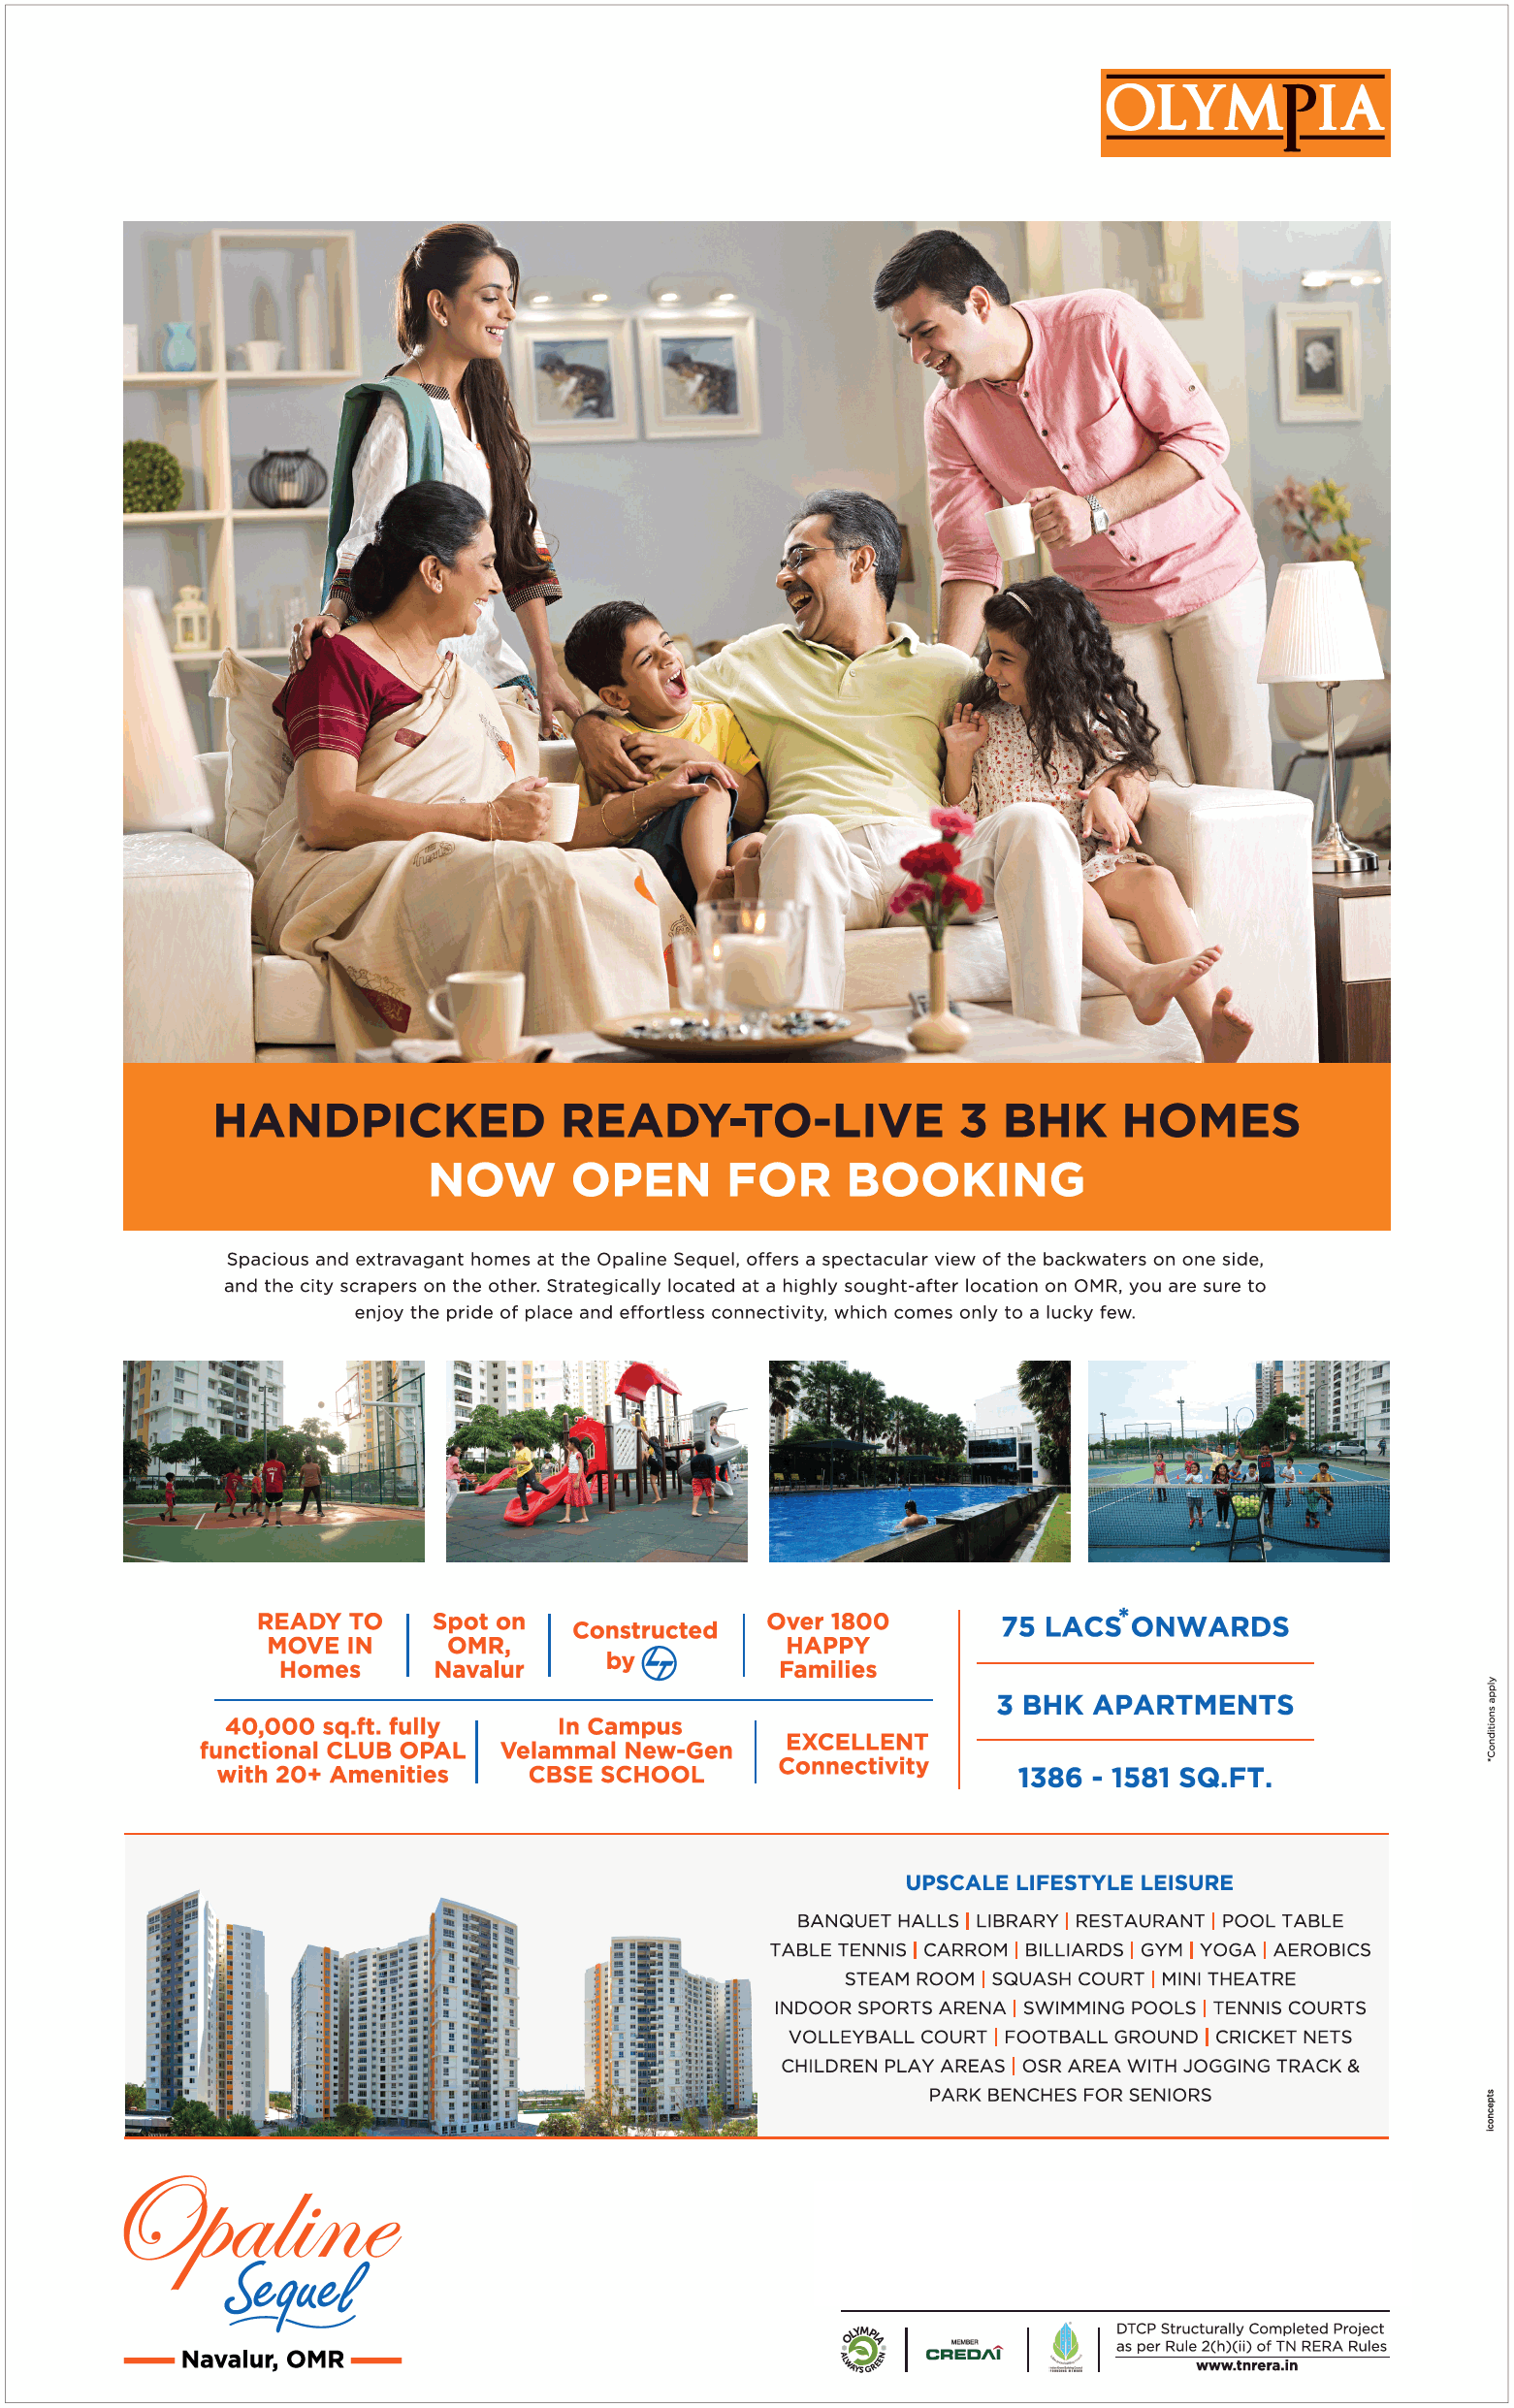 Ready to move in home at Olympia Opaline Sequel, Chennai Update